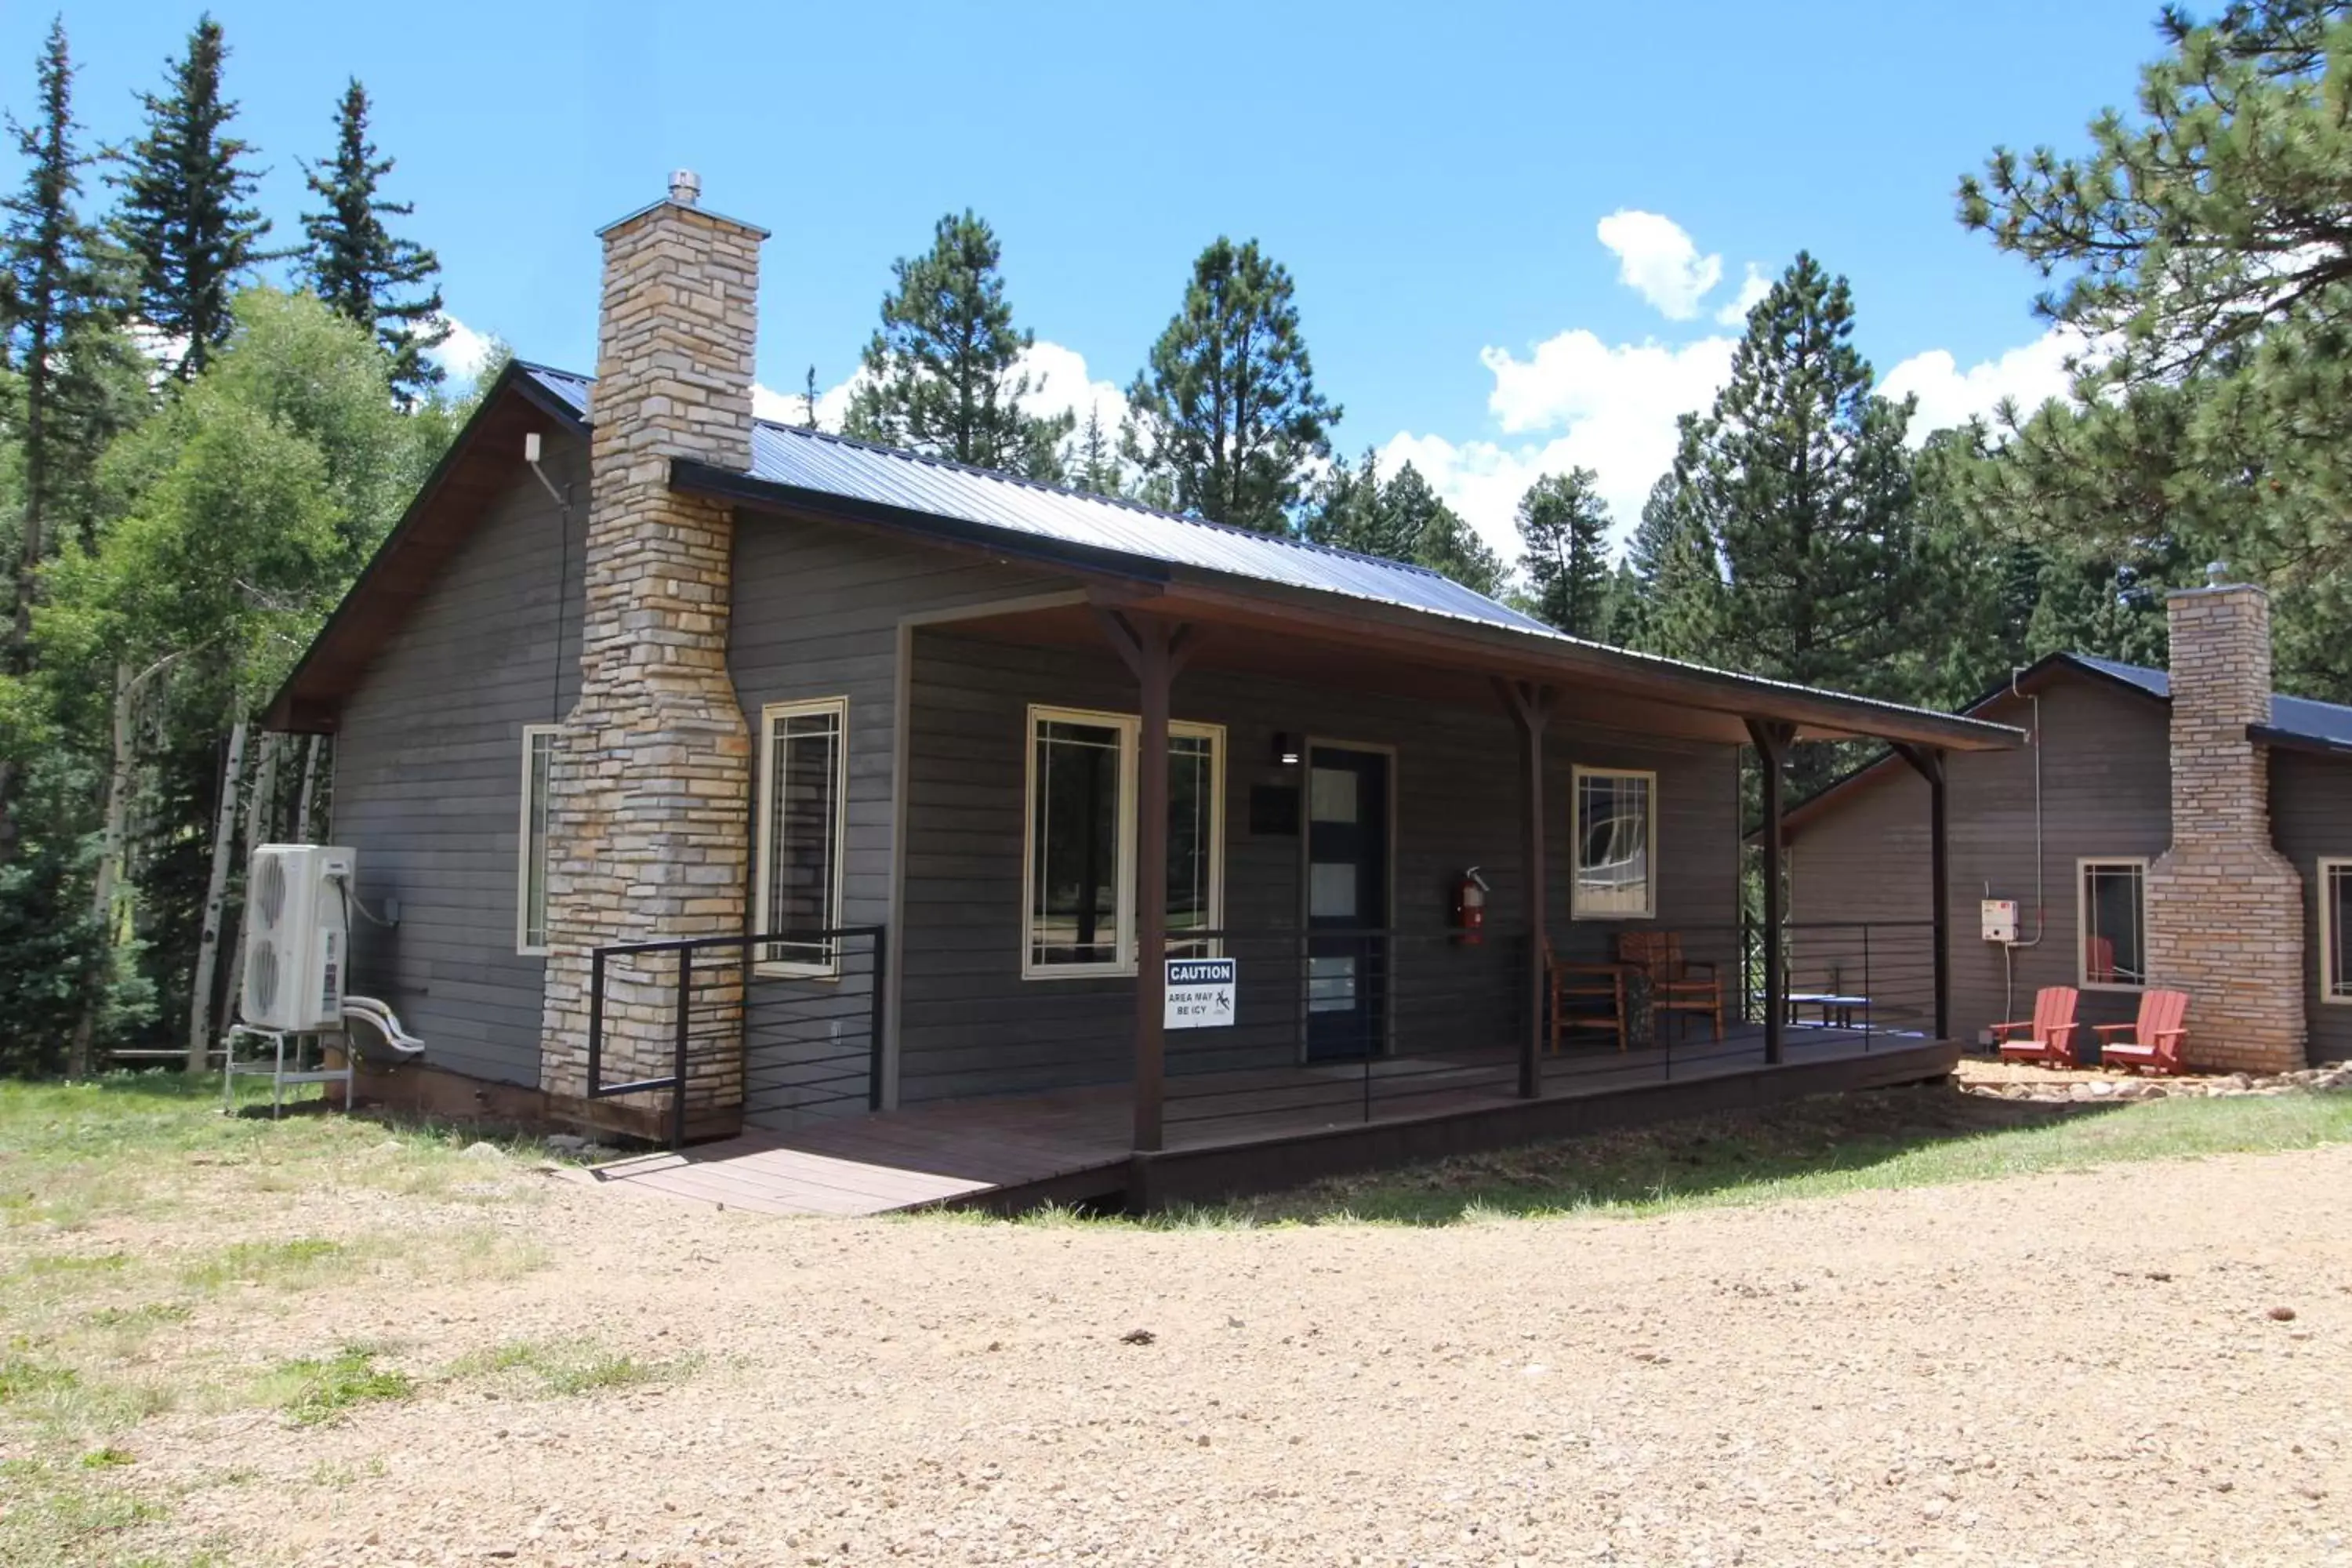 Property Building in The Retreat at Angel Fire